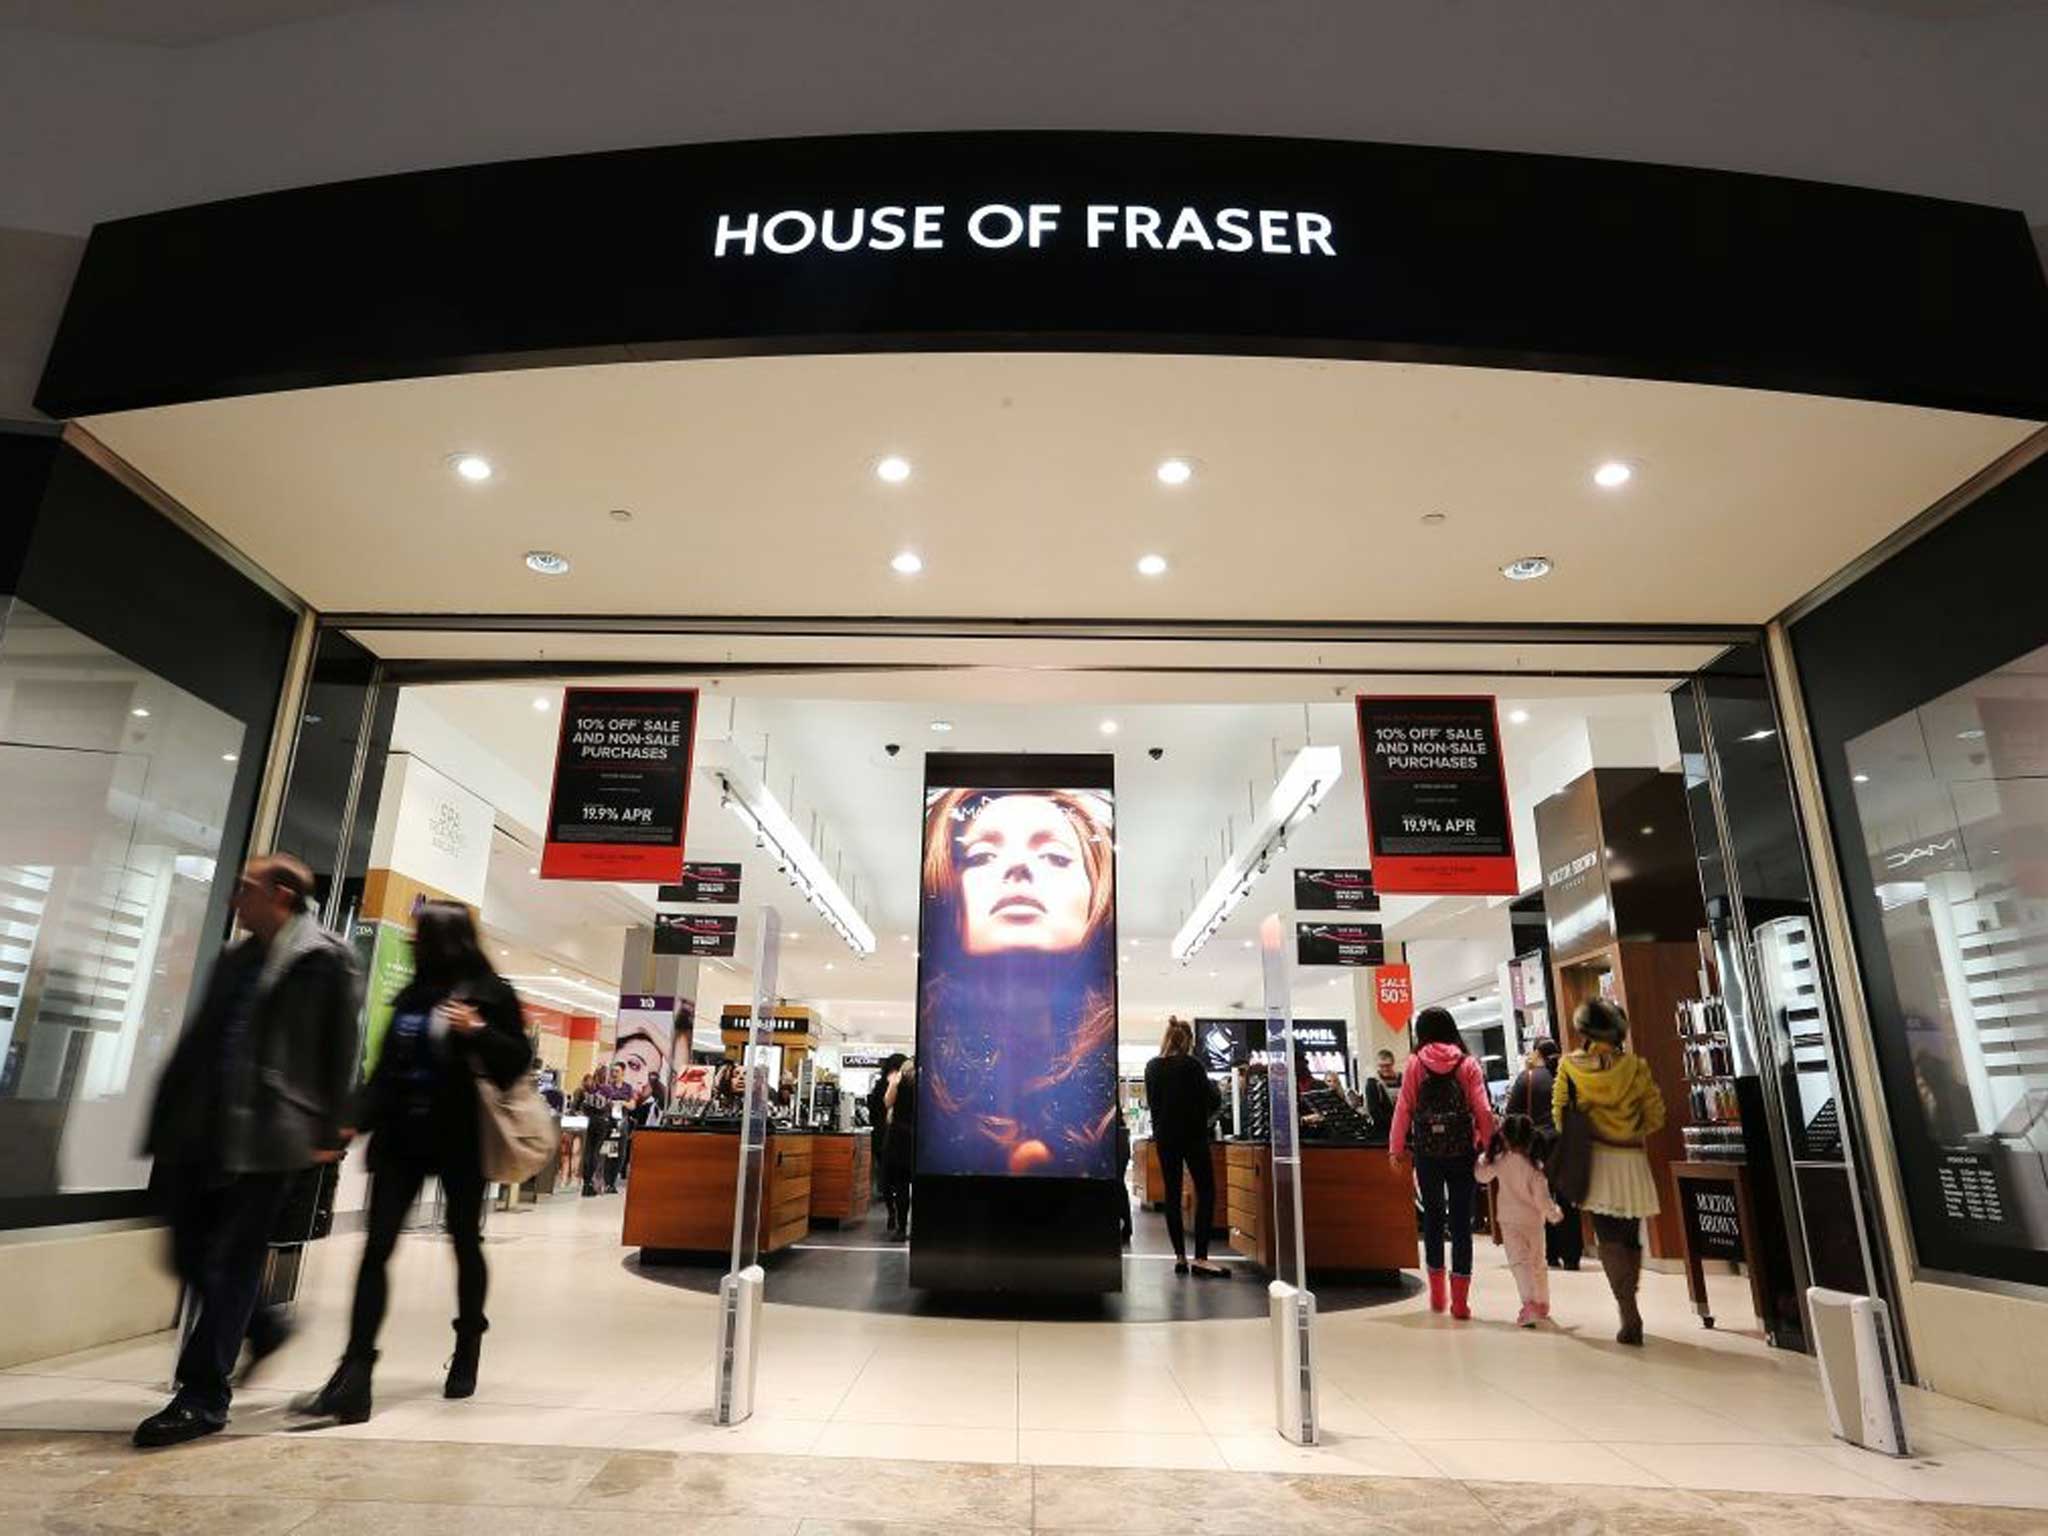 Mike Ashley, who also owns Newcastle United, is expanding his interests to House of Fraser